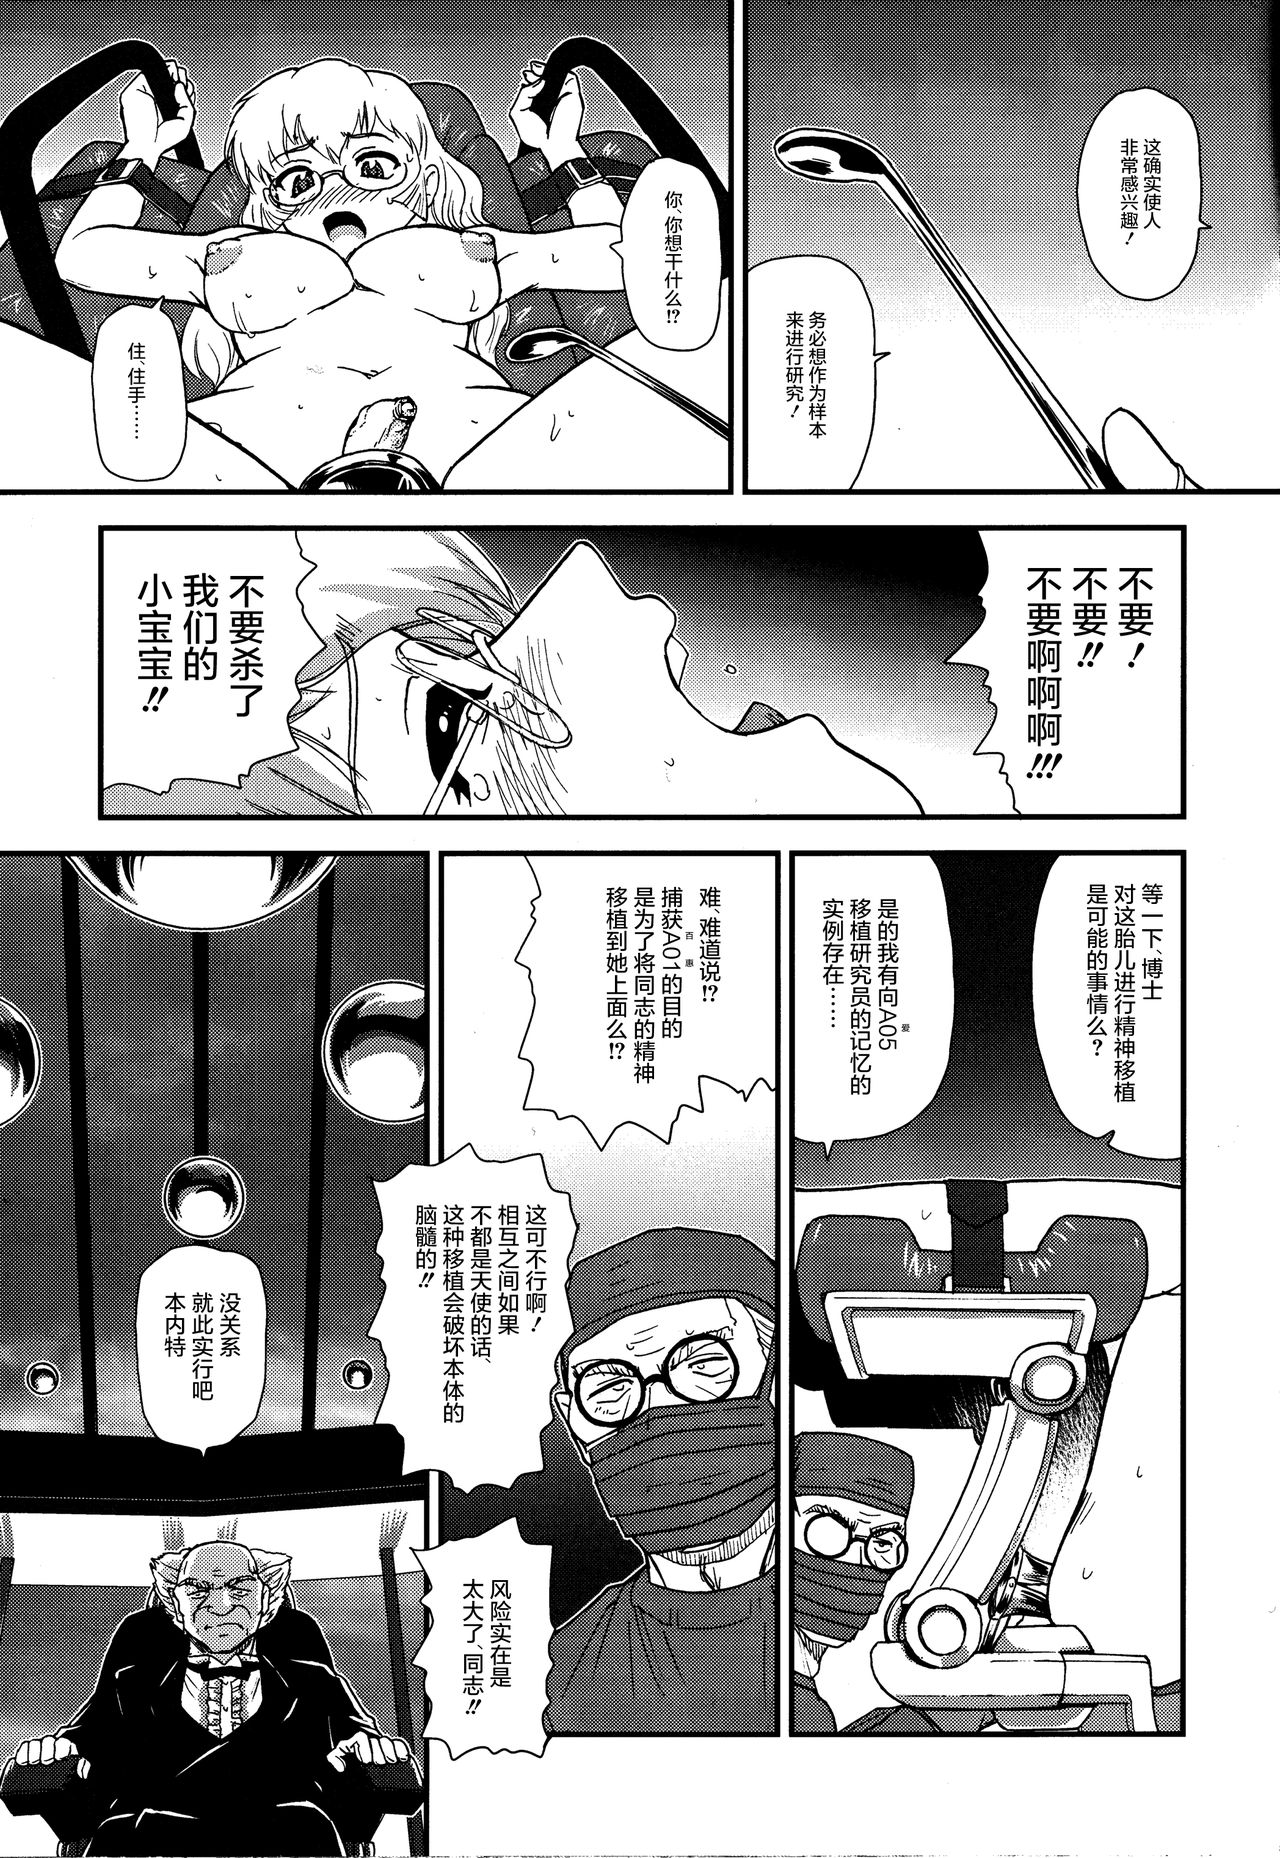 (C81) [Behind Moon (Q)] Dulce Report 14 | 达西报告 14 [Chinese] [鬼畜王汉化组] [Decensored] page 15 full